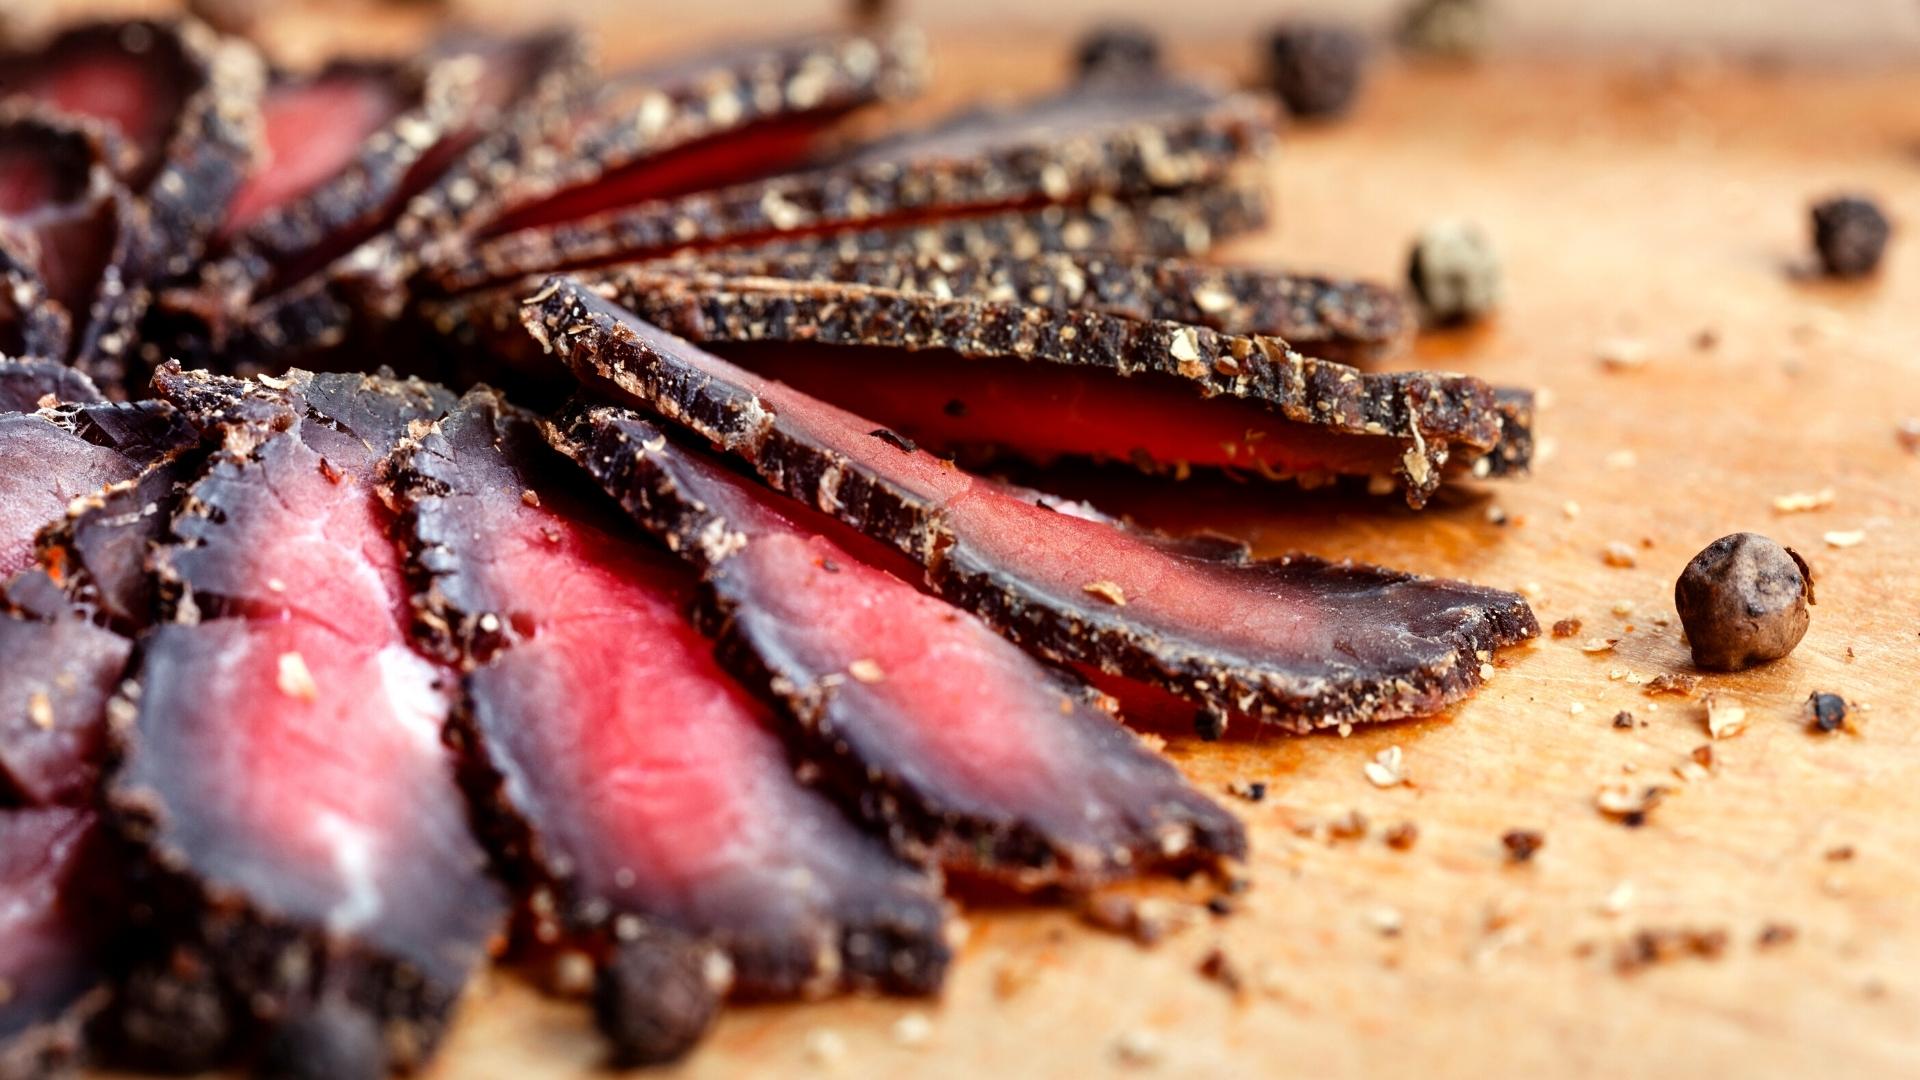 How To Make South African-Style Biltong